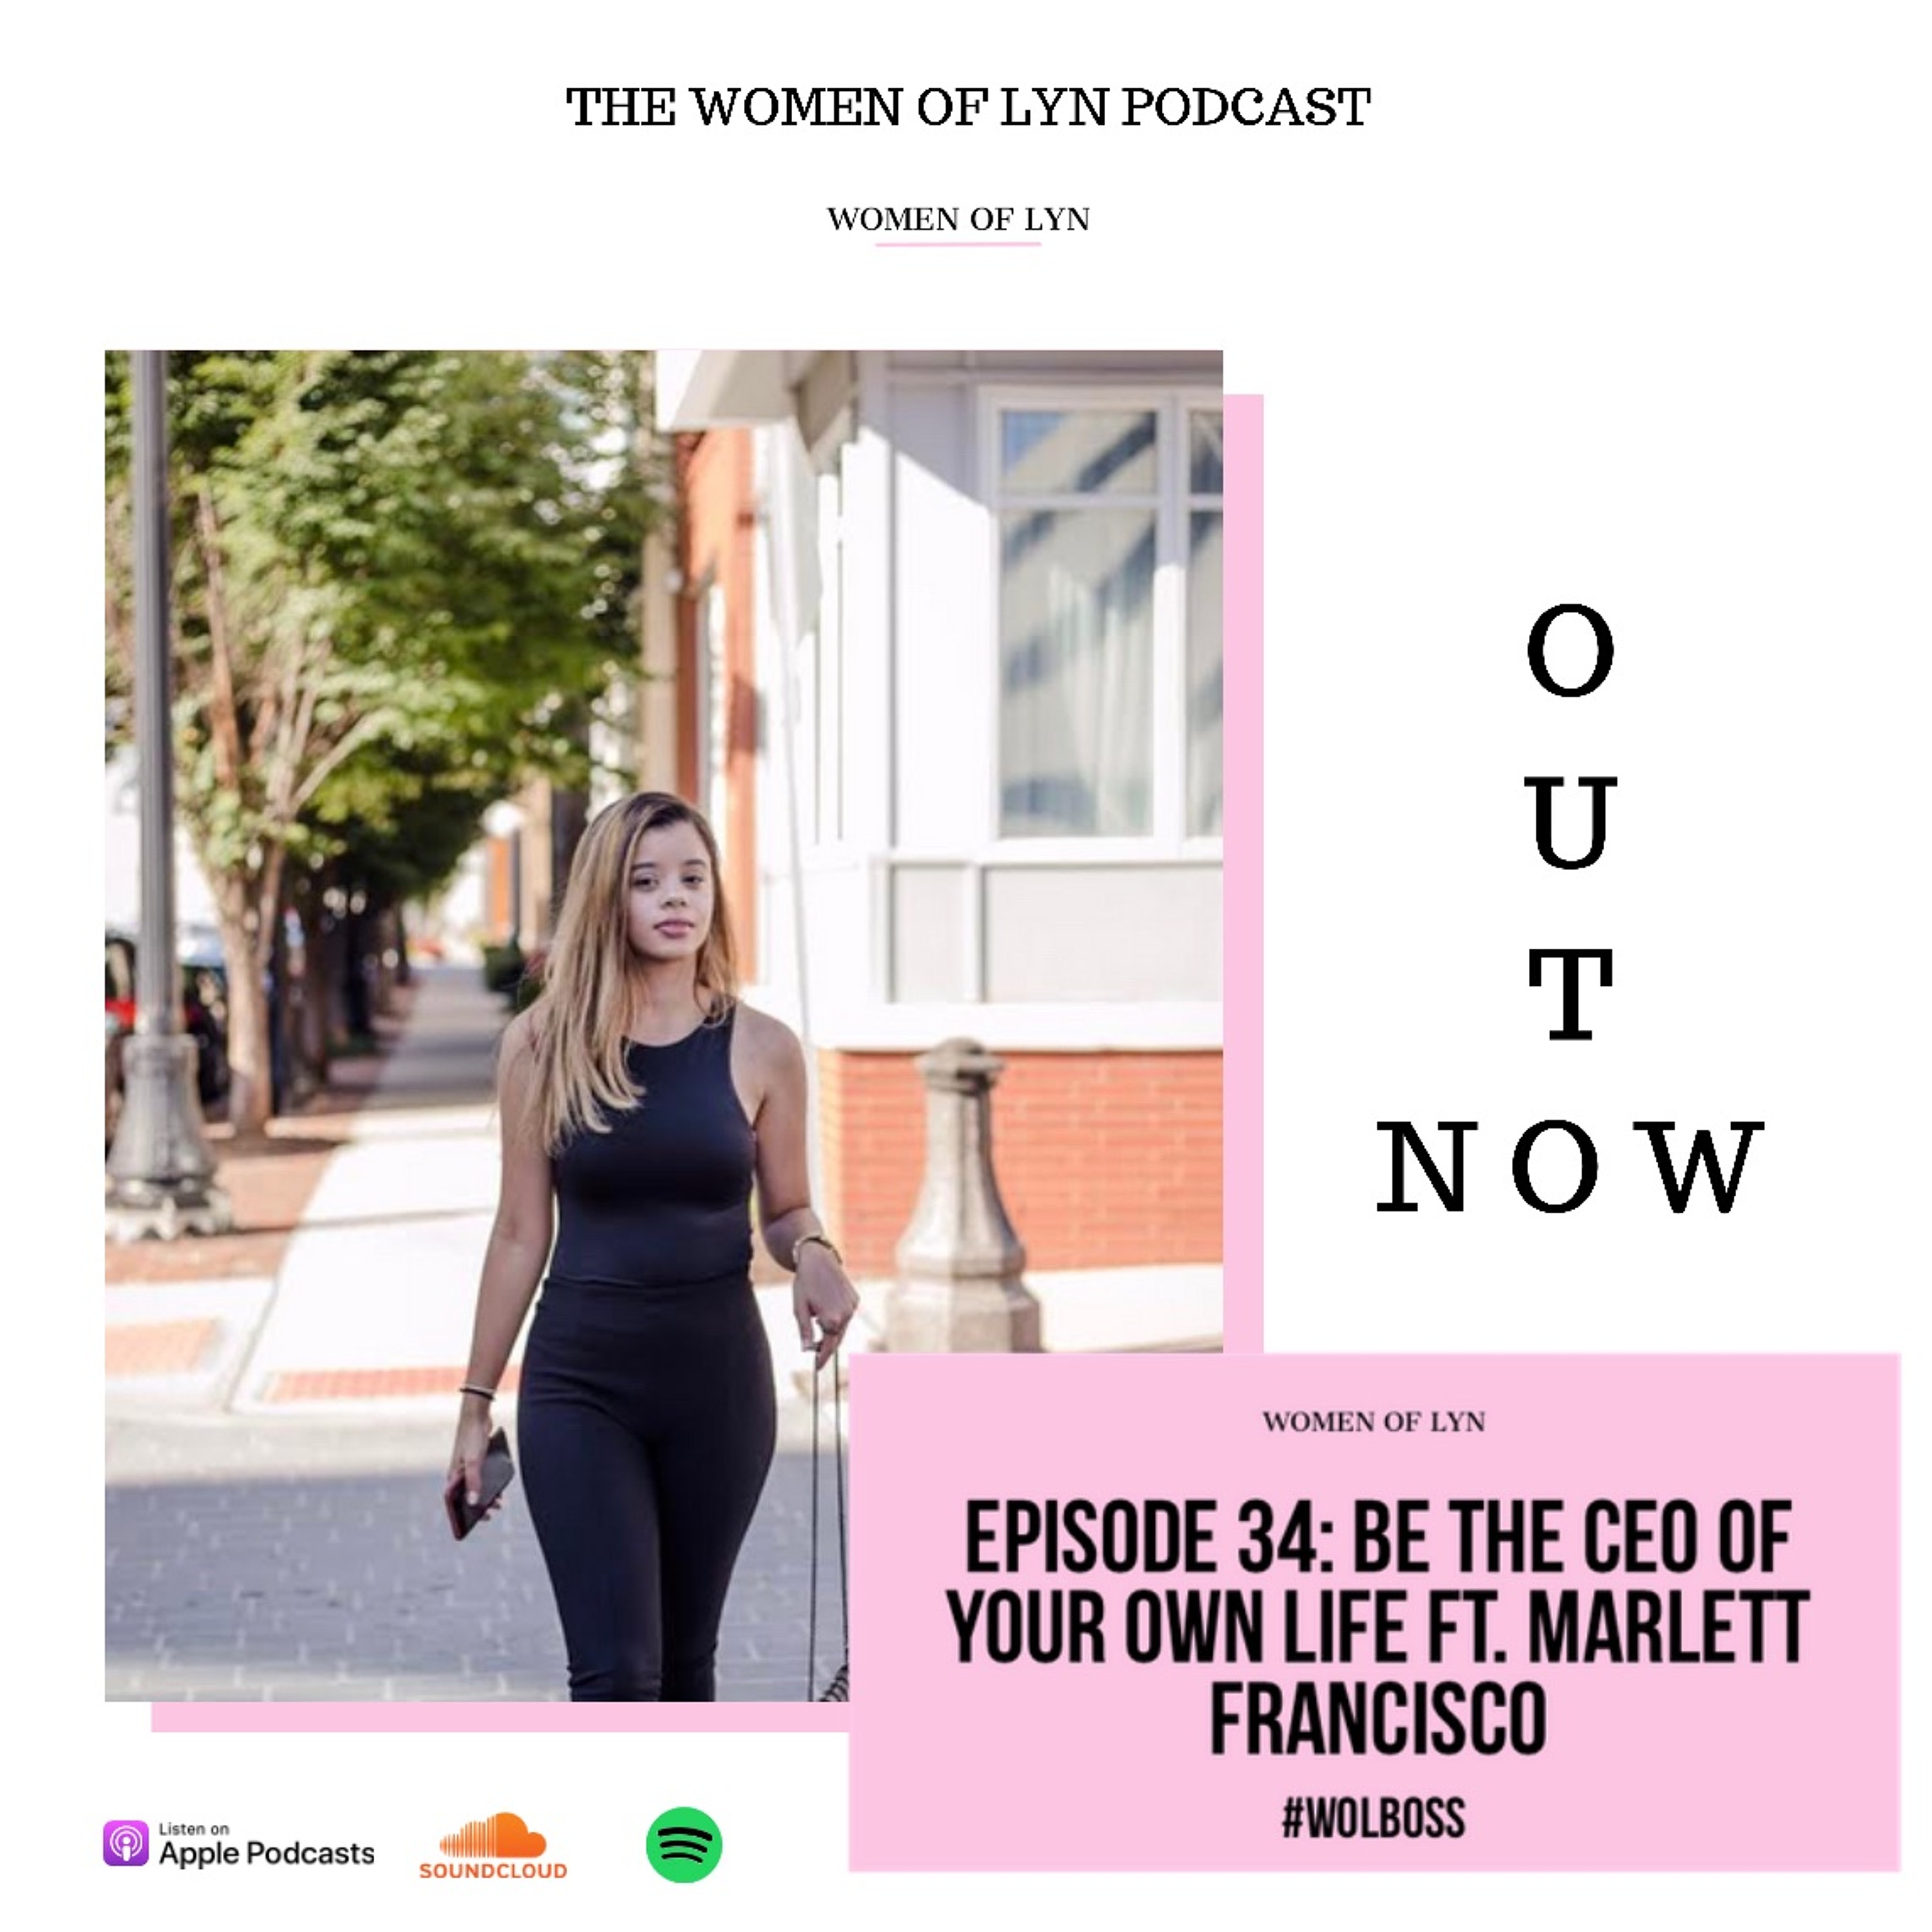 Episode 34: ”Be The CEO Of Your Own Life” Ft. Marlett Francisco